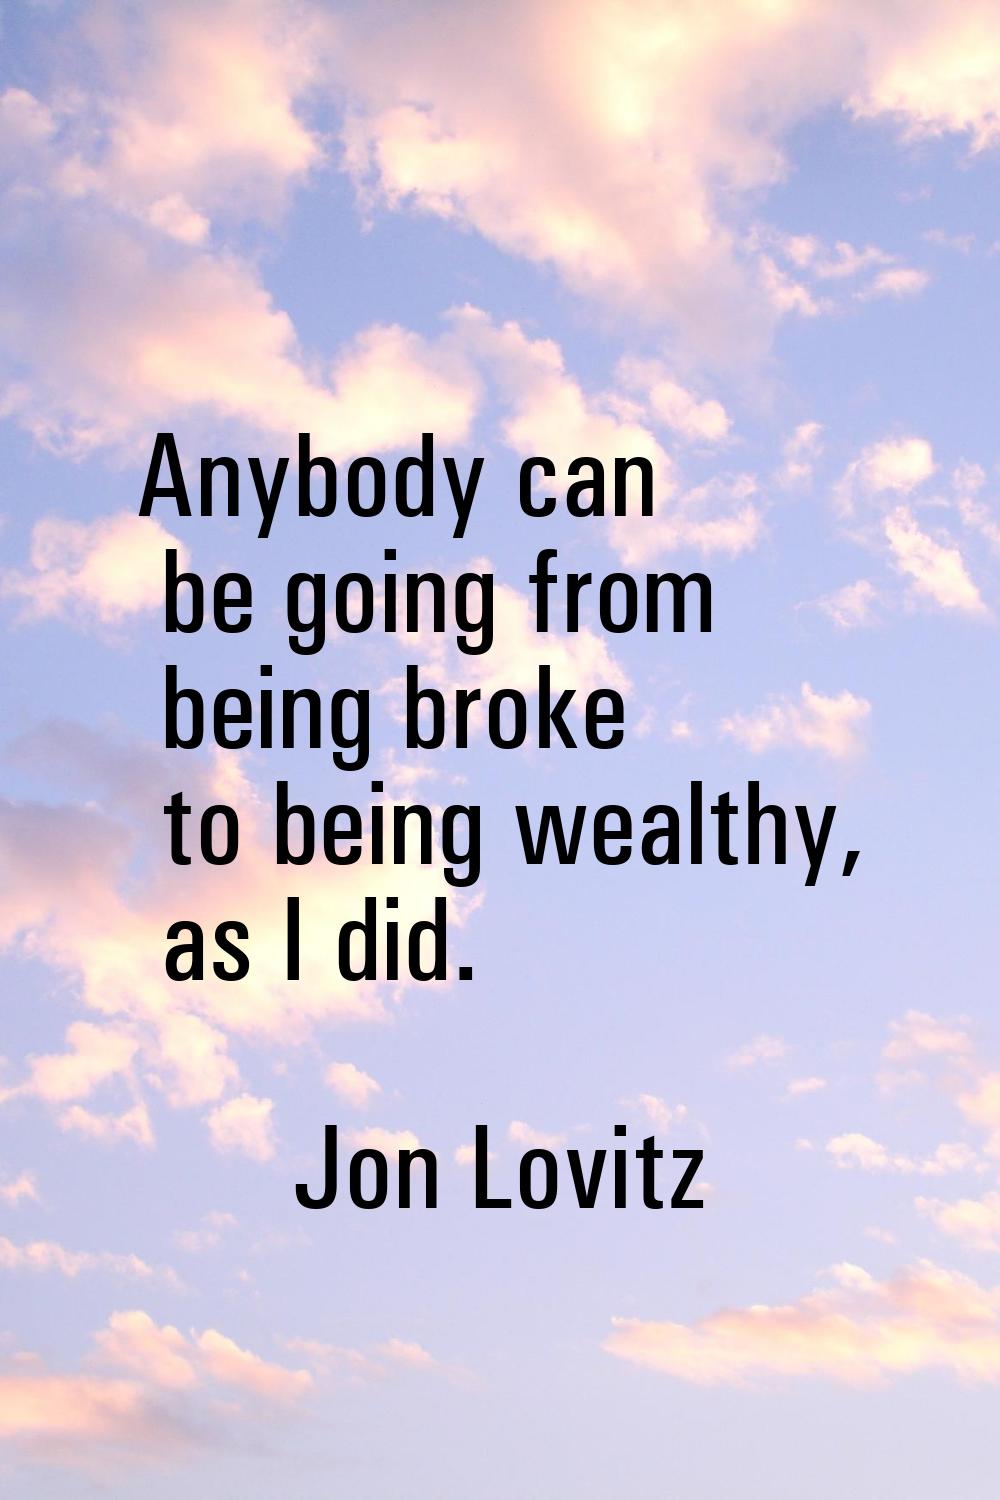 Anybody can be going from being broke to being wealthy, as I did.